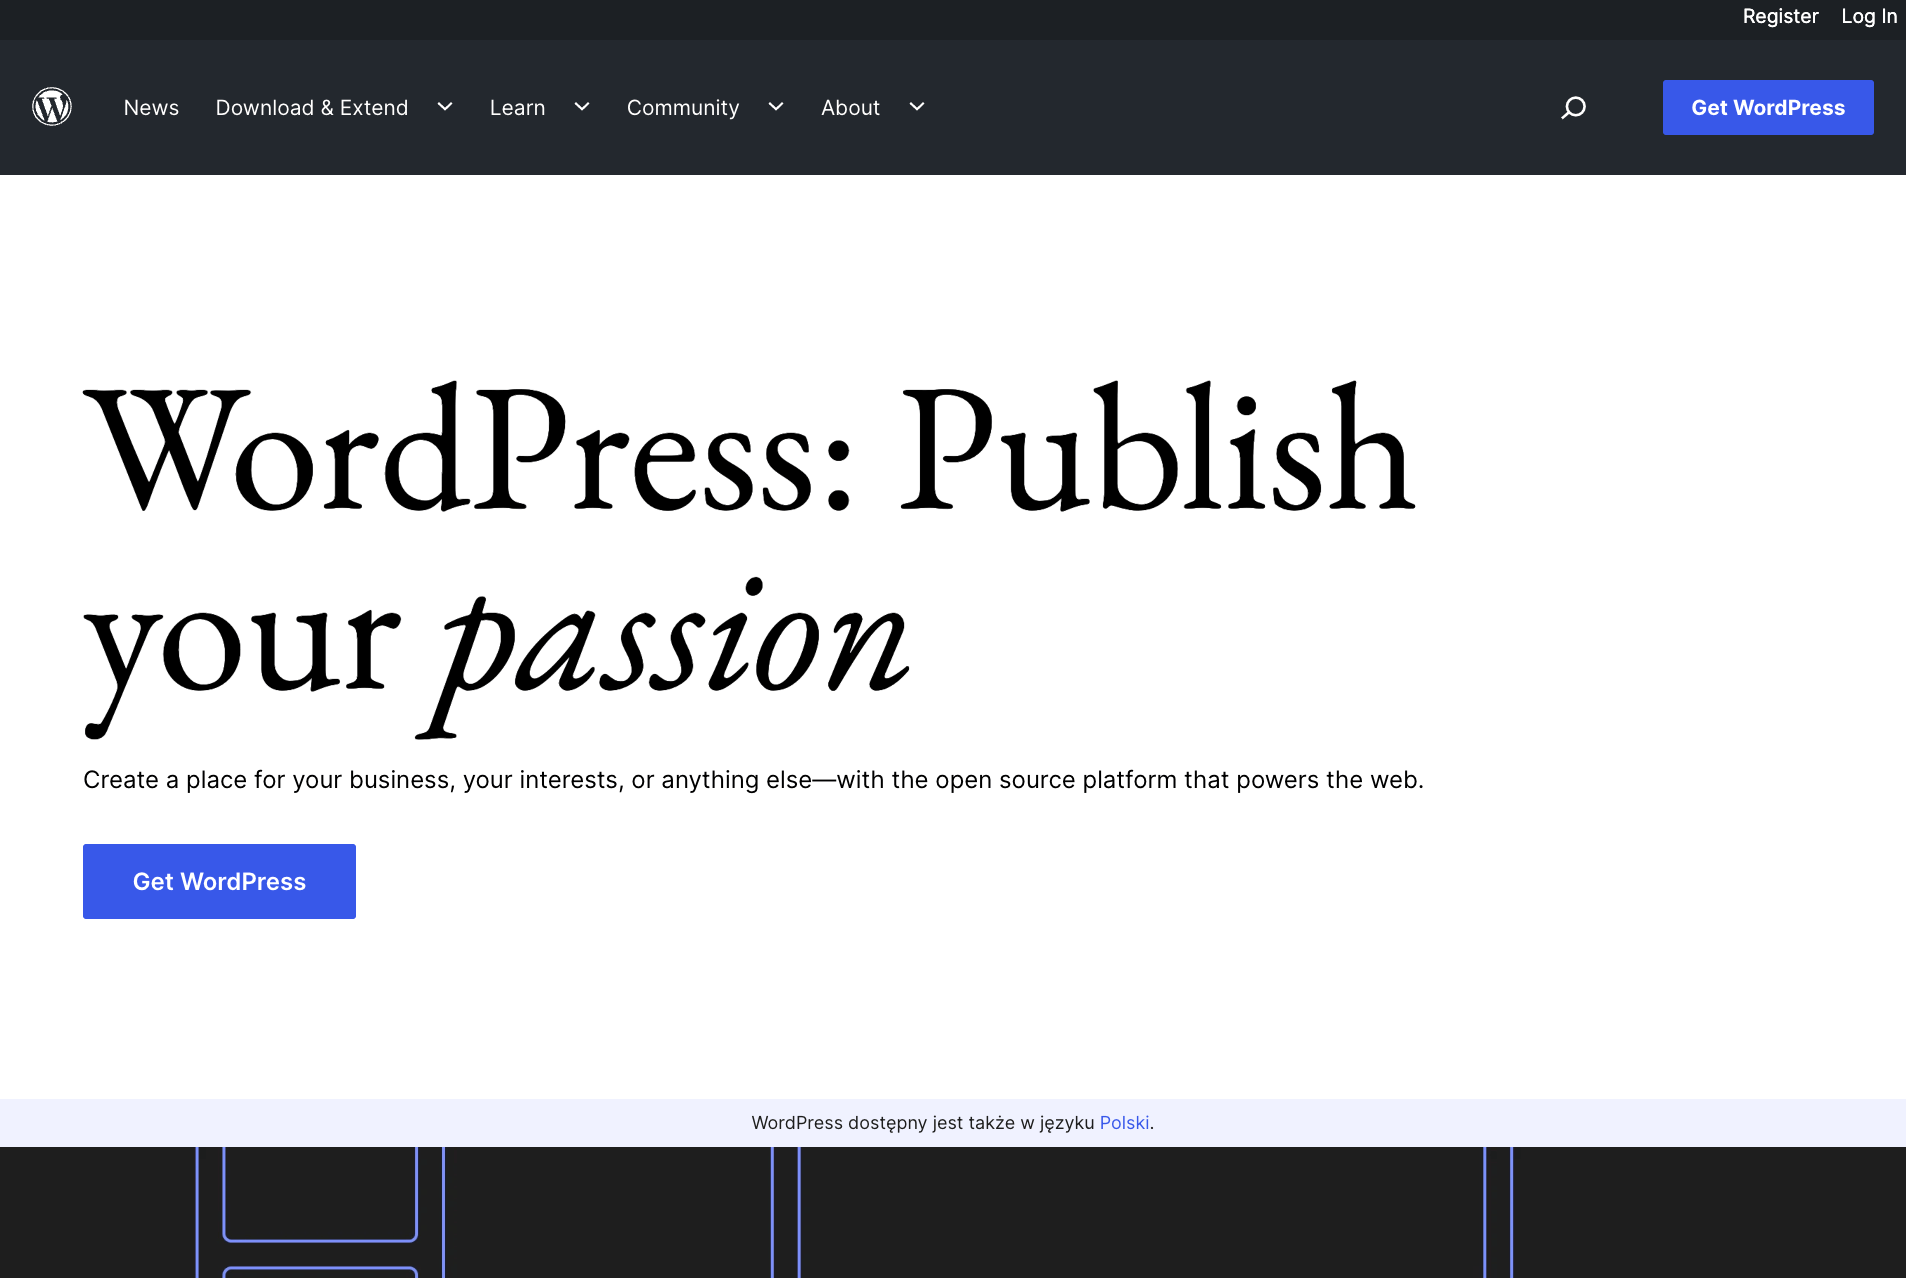 The homepage for the CMS WordPress.